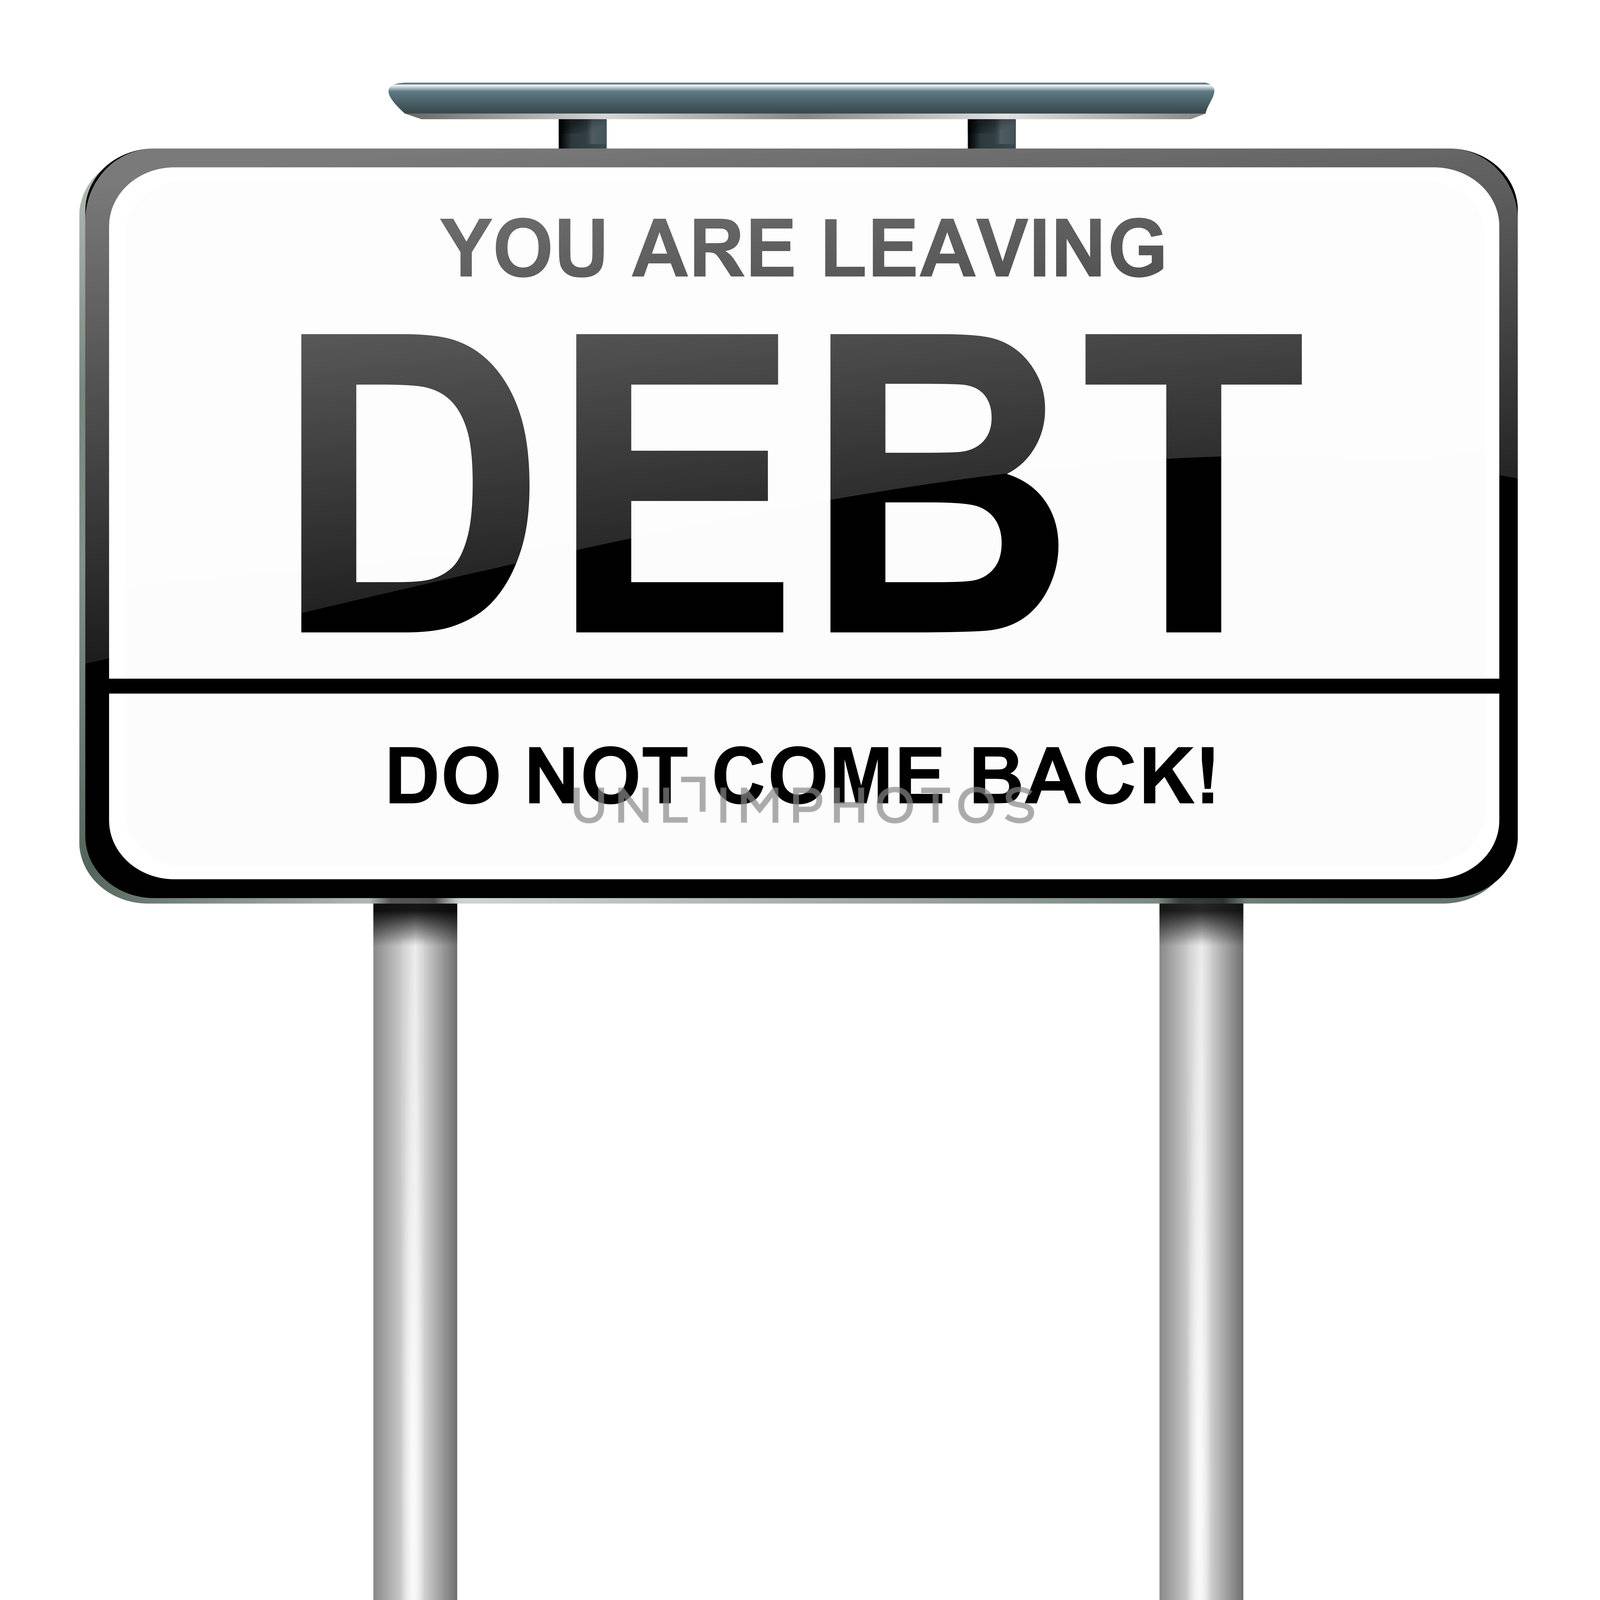 Illustration depicting a roadsign with a debt concept. White background.